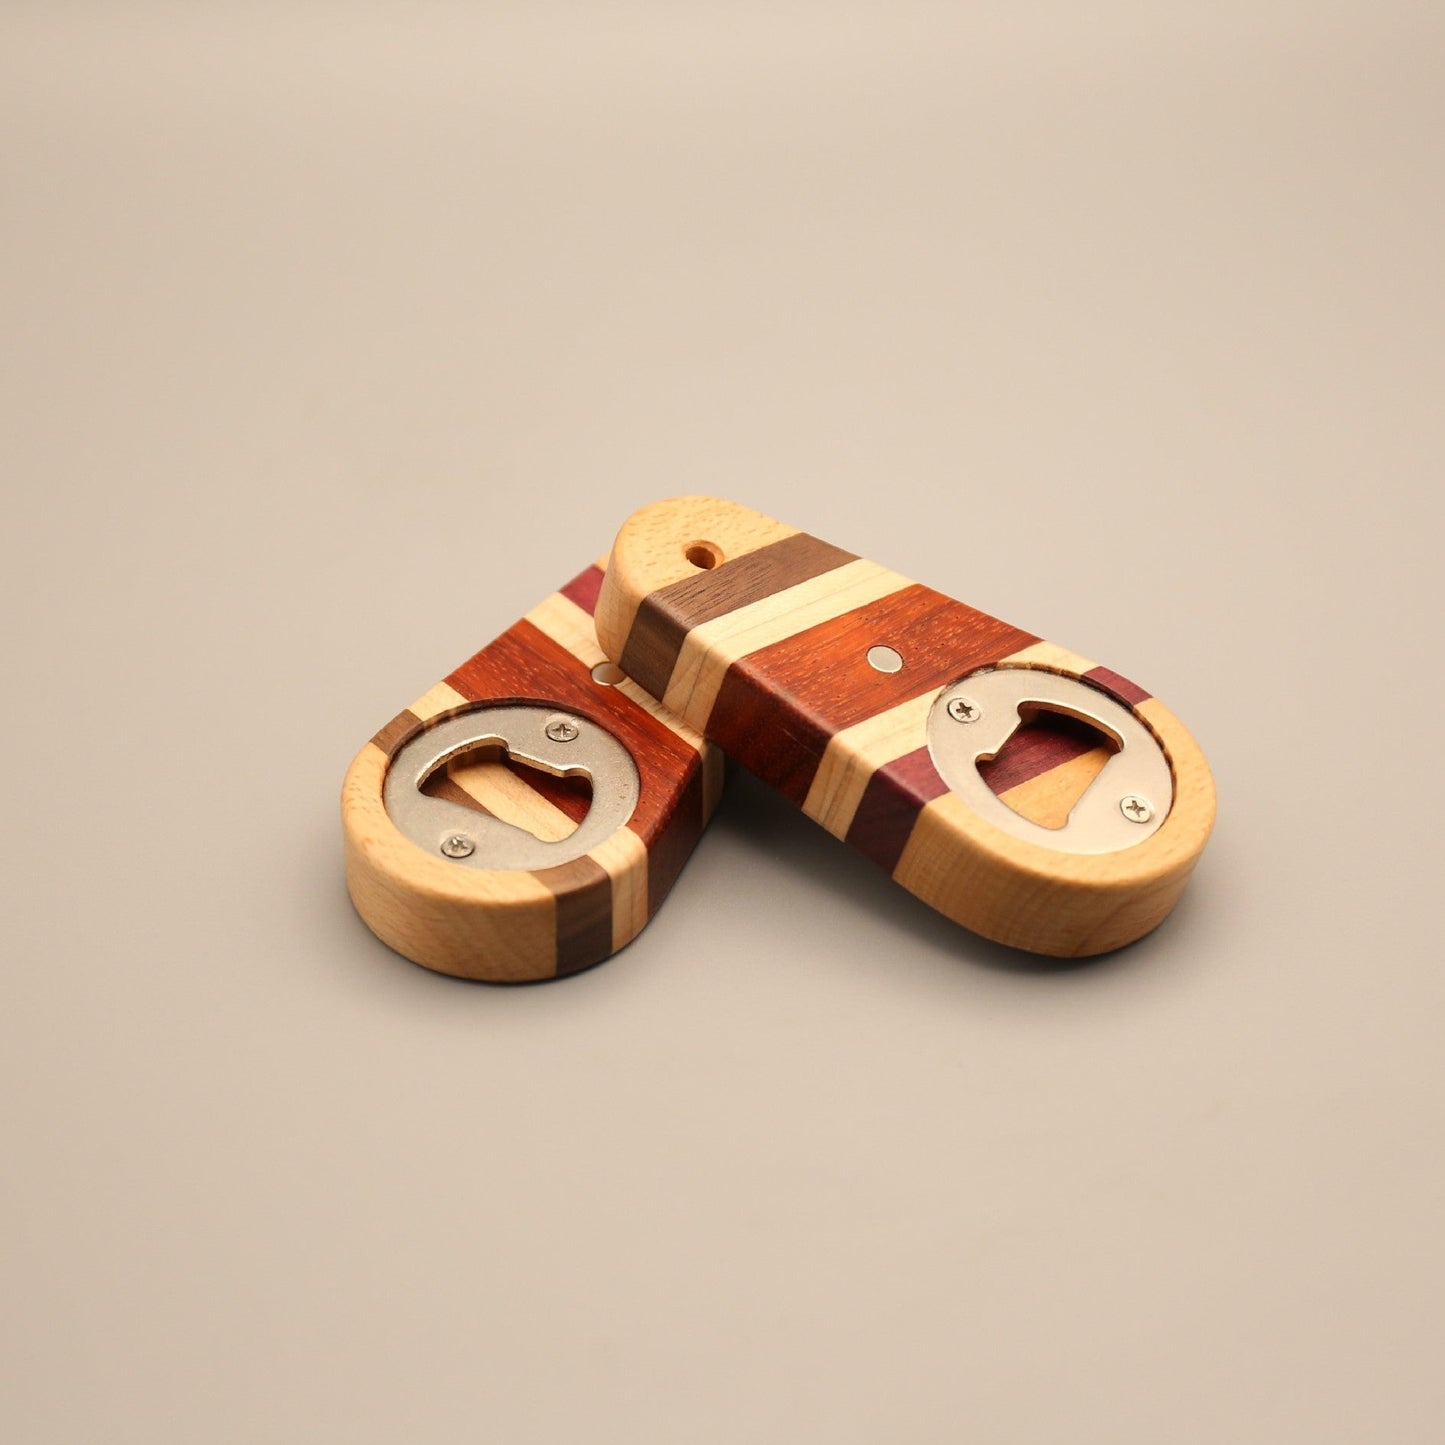 Two wooden bottle openers with a handle made of wood- yourstuffmade